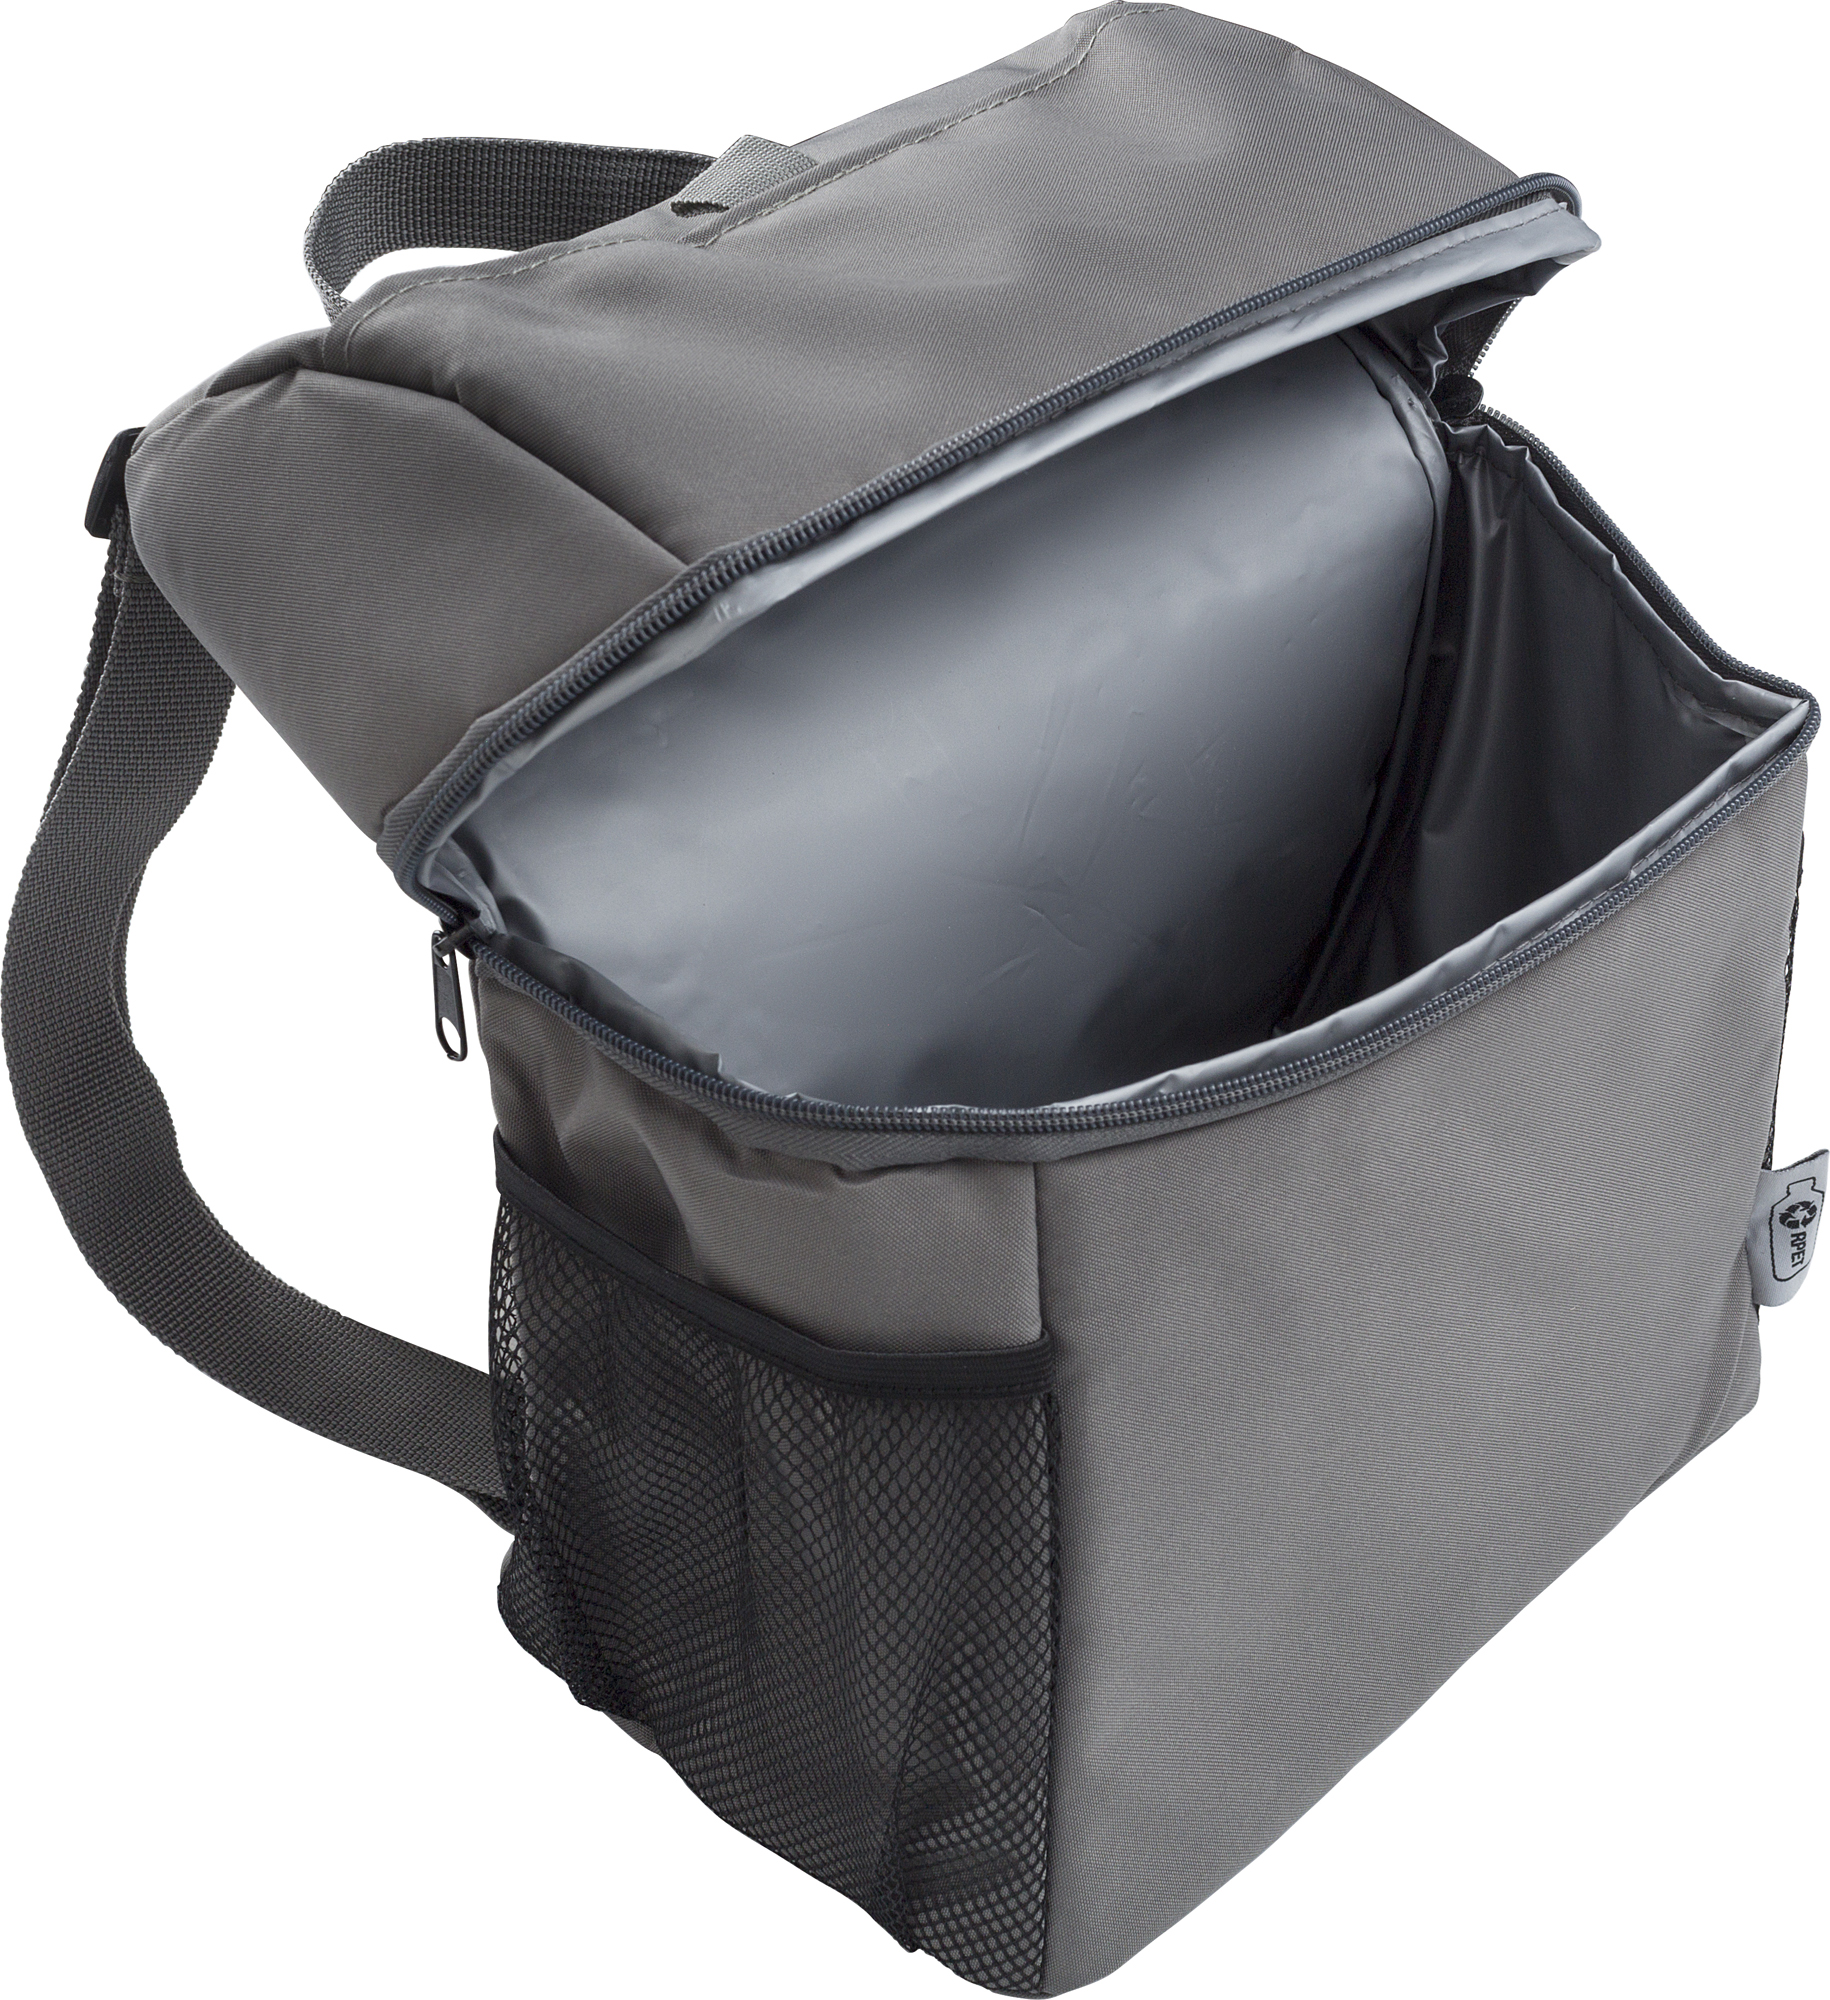 000000967421 003999999 3d135 gbo pro02 2023 fal - Recycled cooler backpack